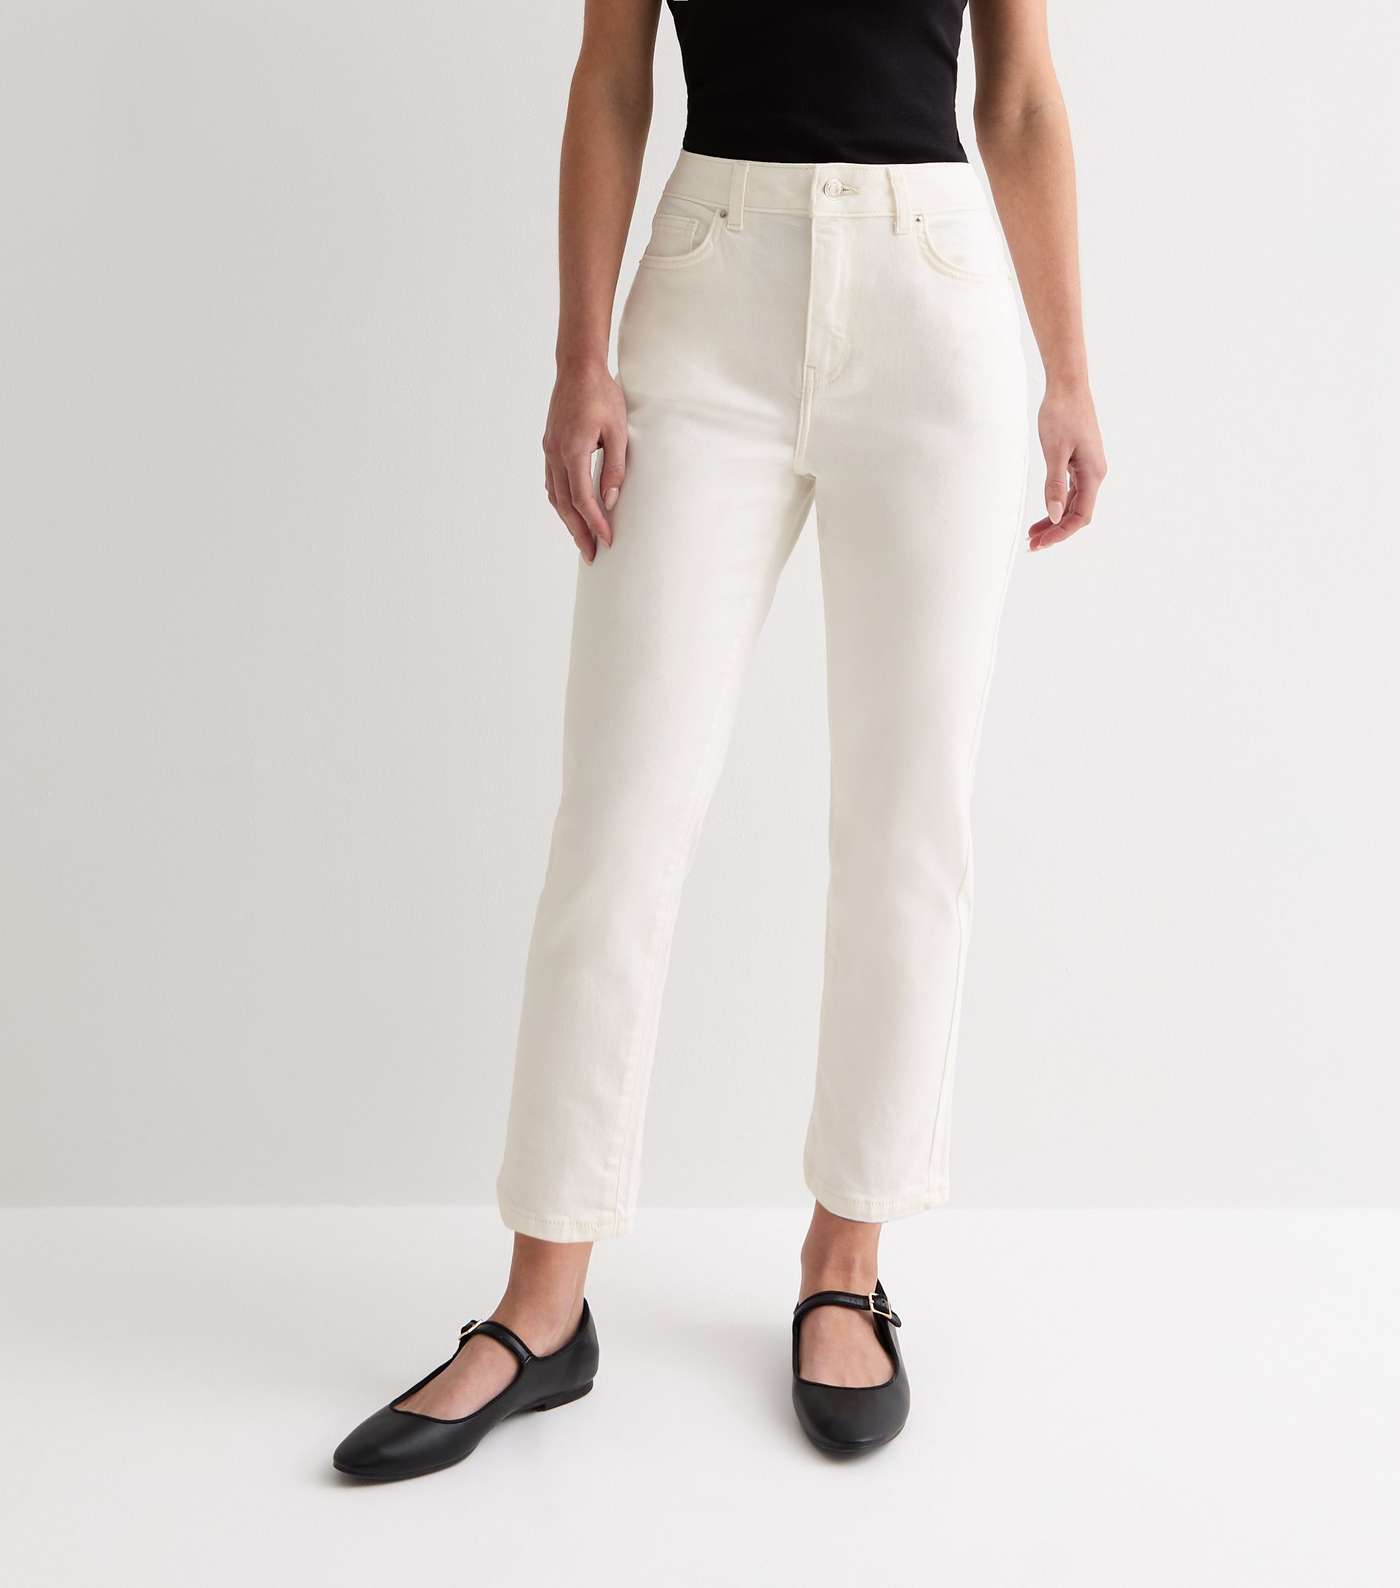 Petite Off White Ankle Grazing Hannah Straight Leg Jeans Image 2